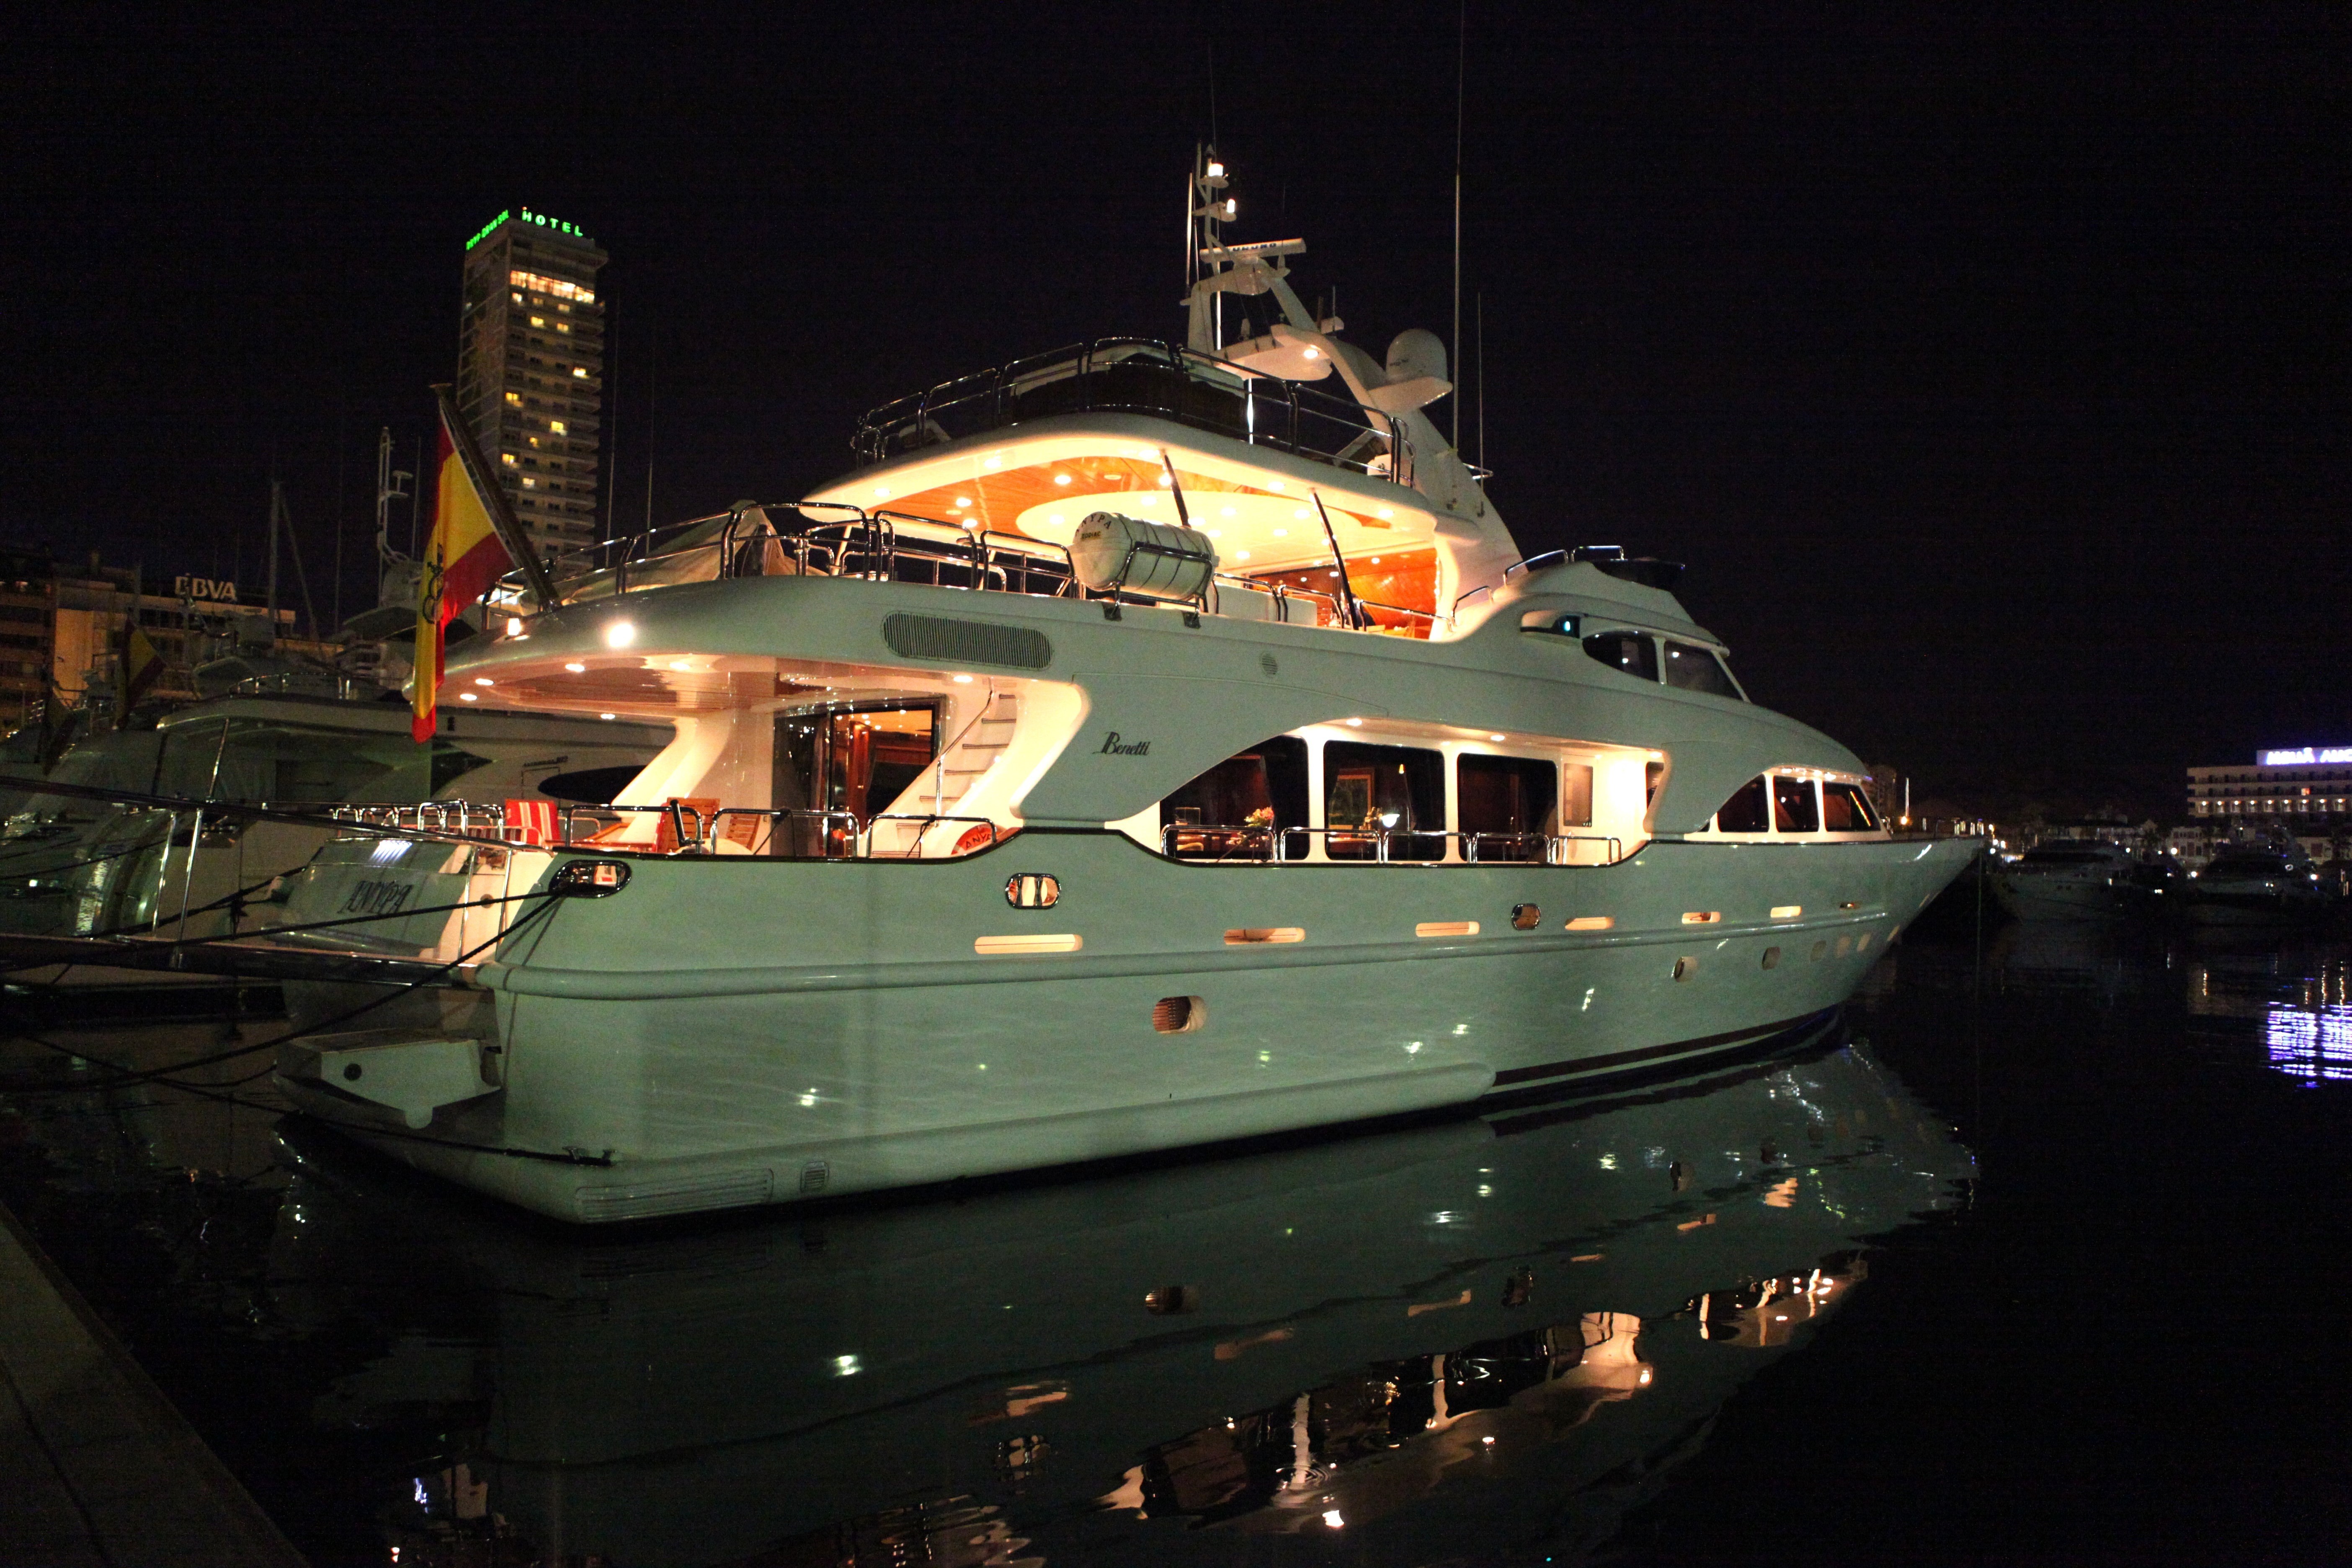 The 30m Yacht ANYPA